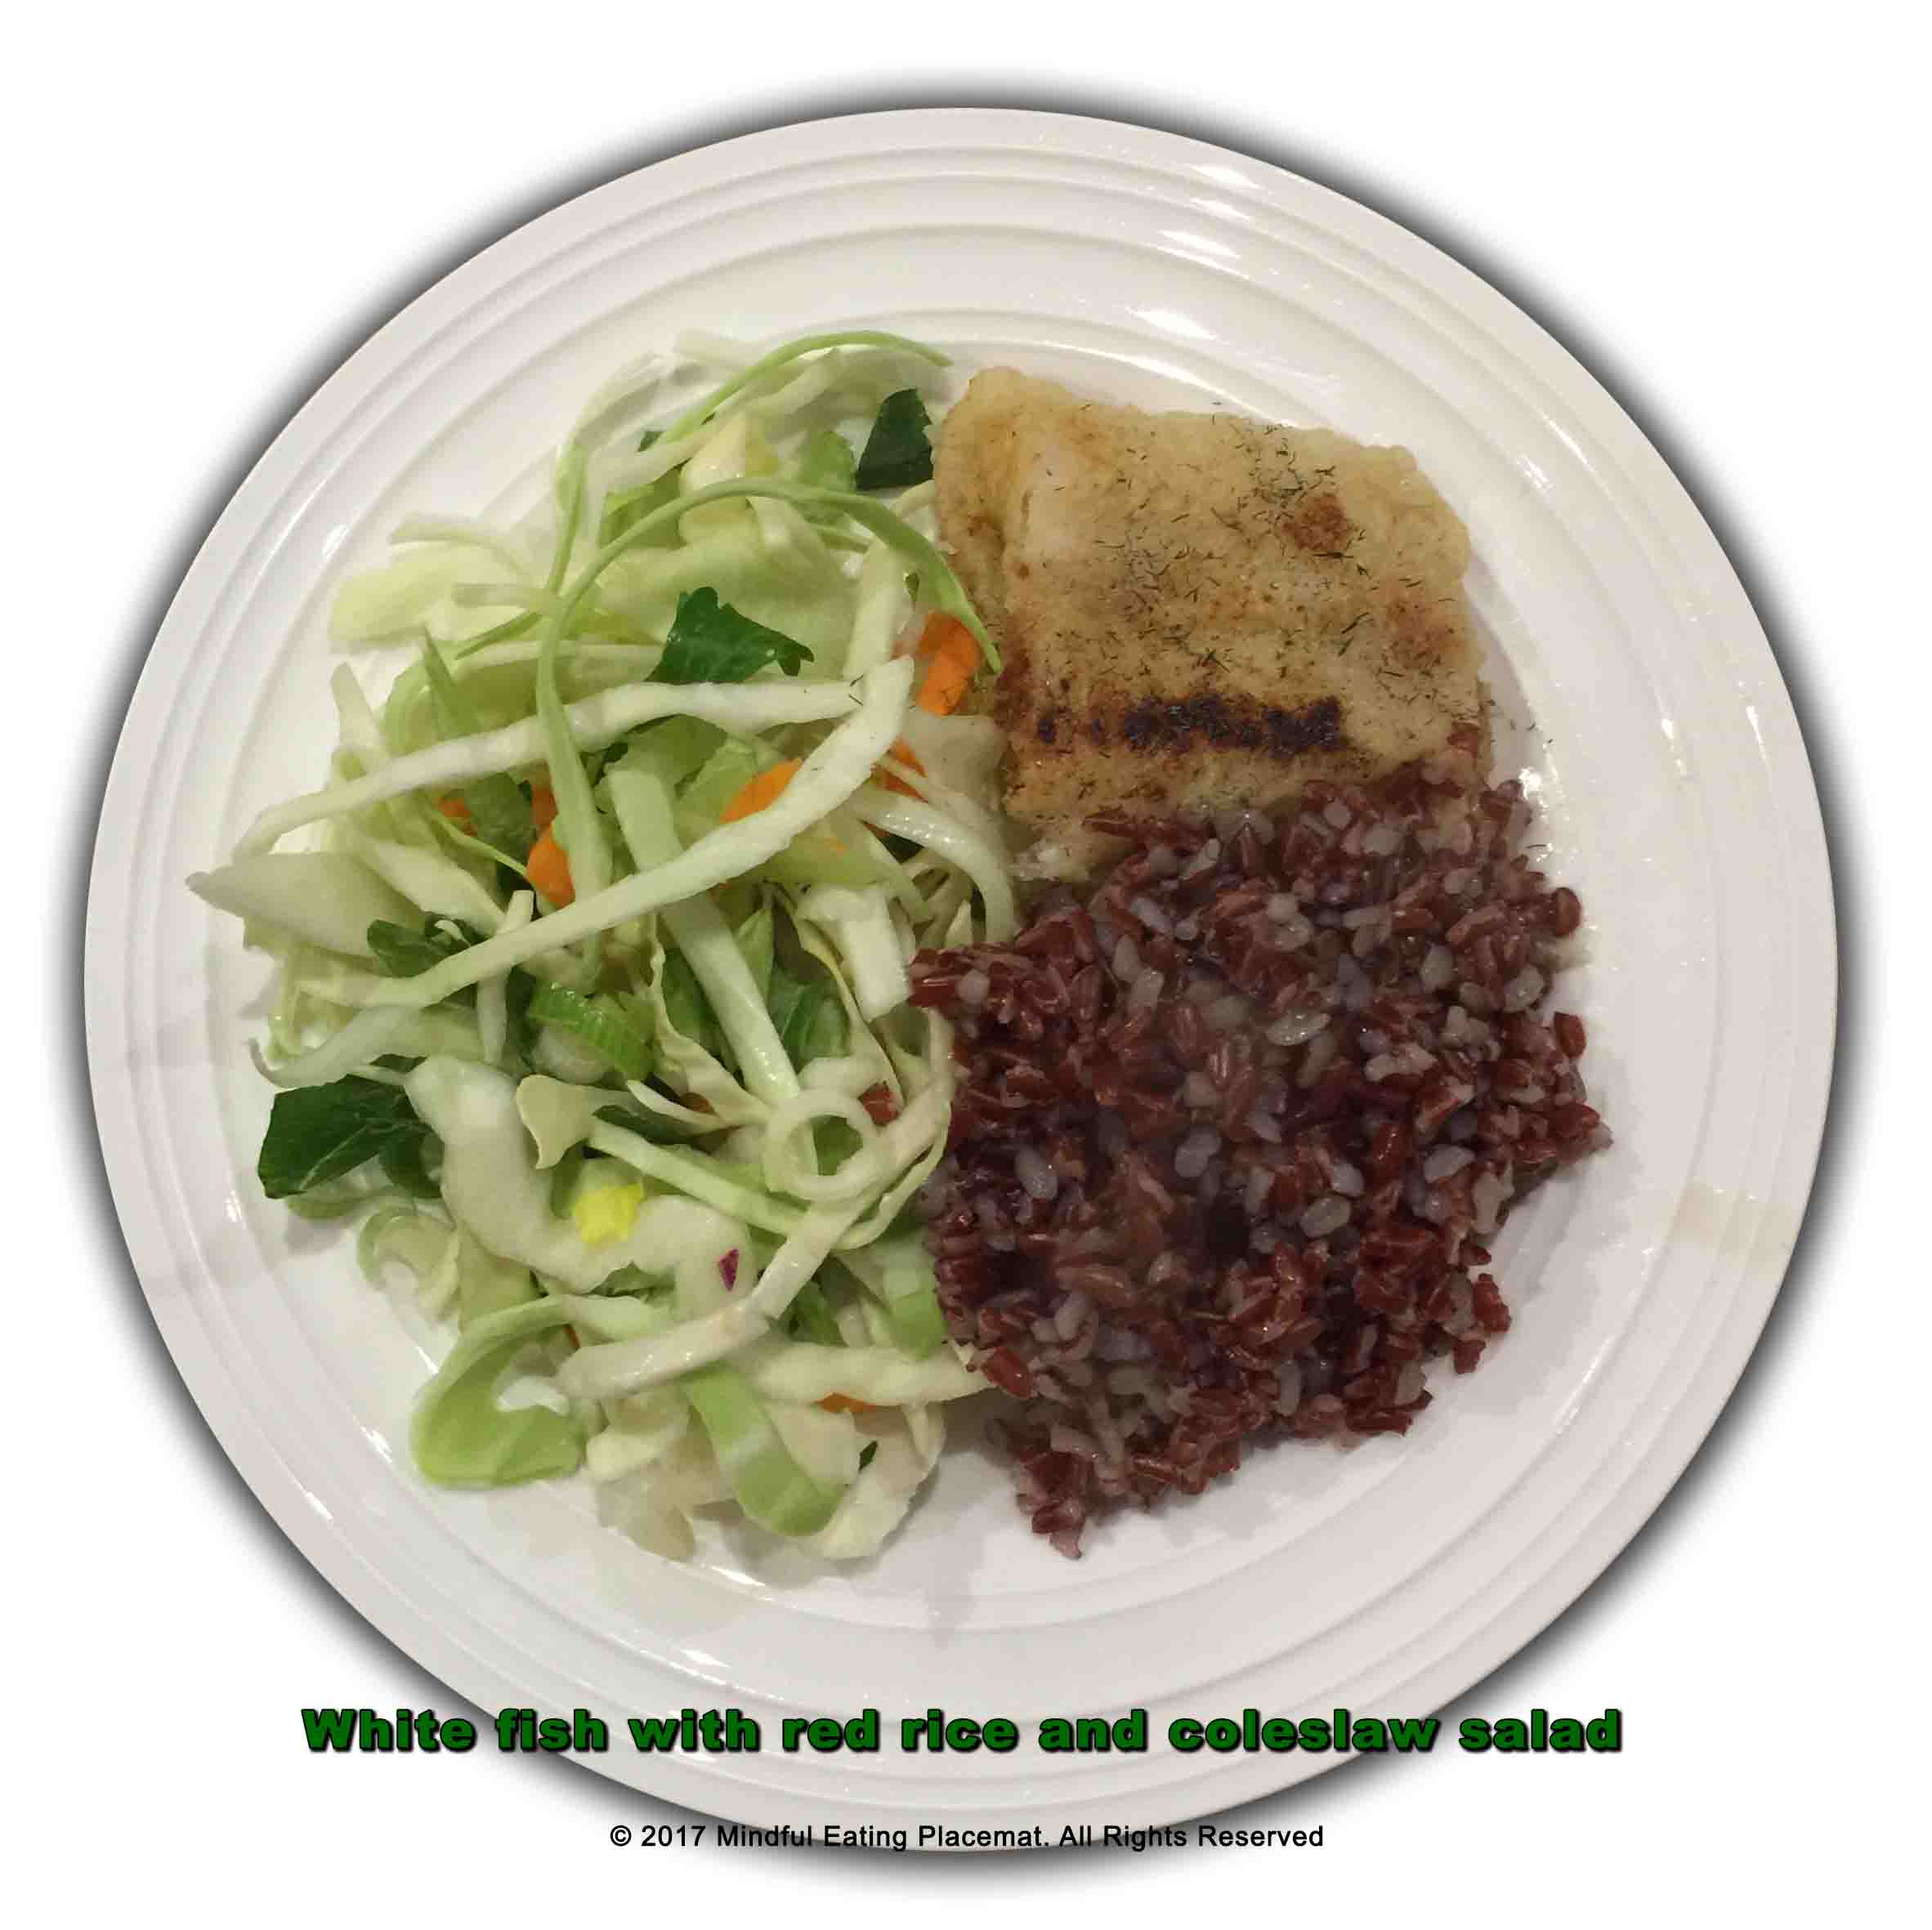 Fish with red rice and coleslaw salad 